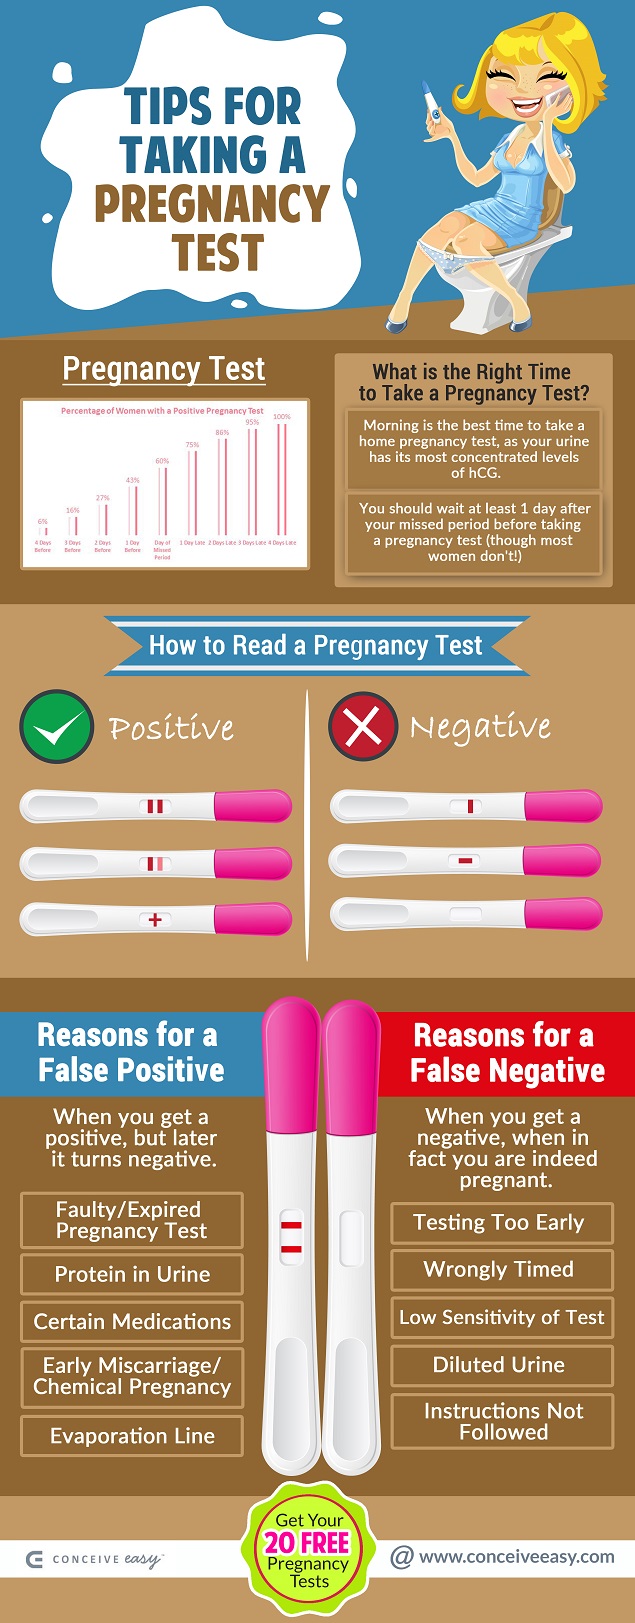 Am I Pregnant? How to Read a Pregnancy Test